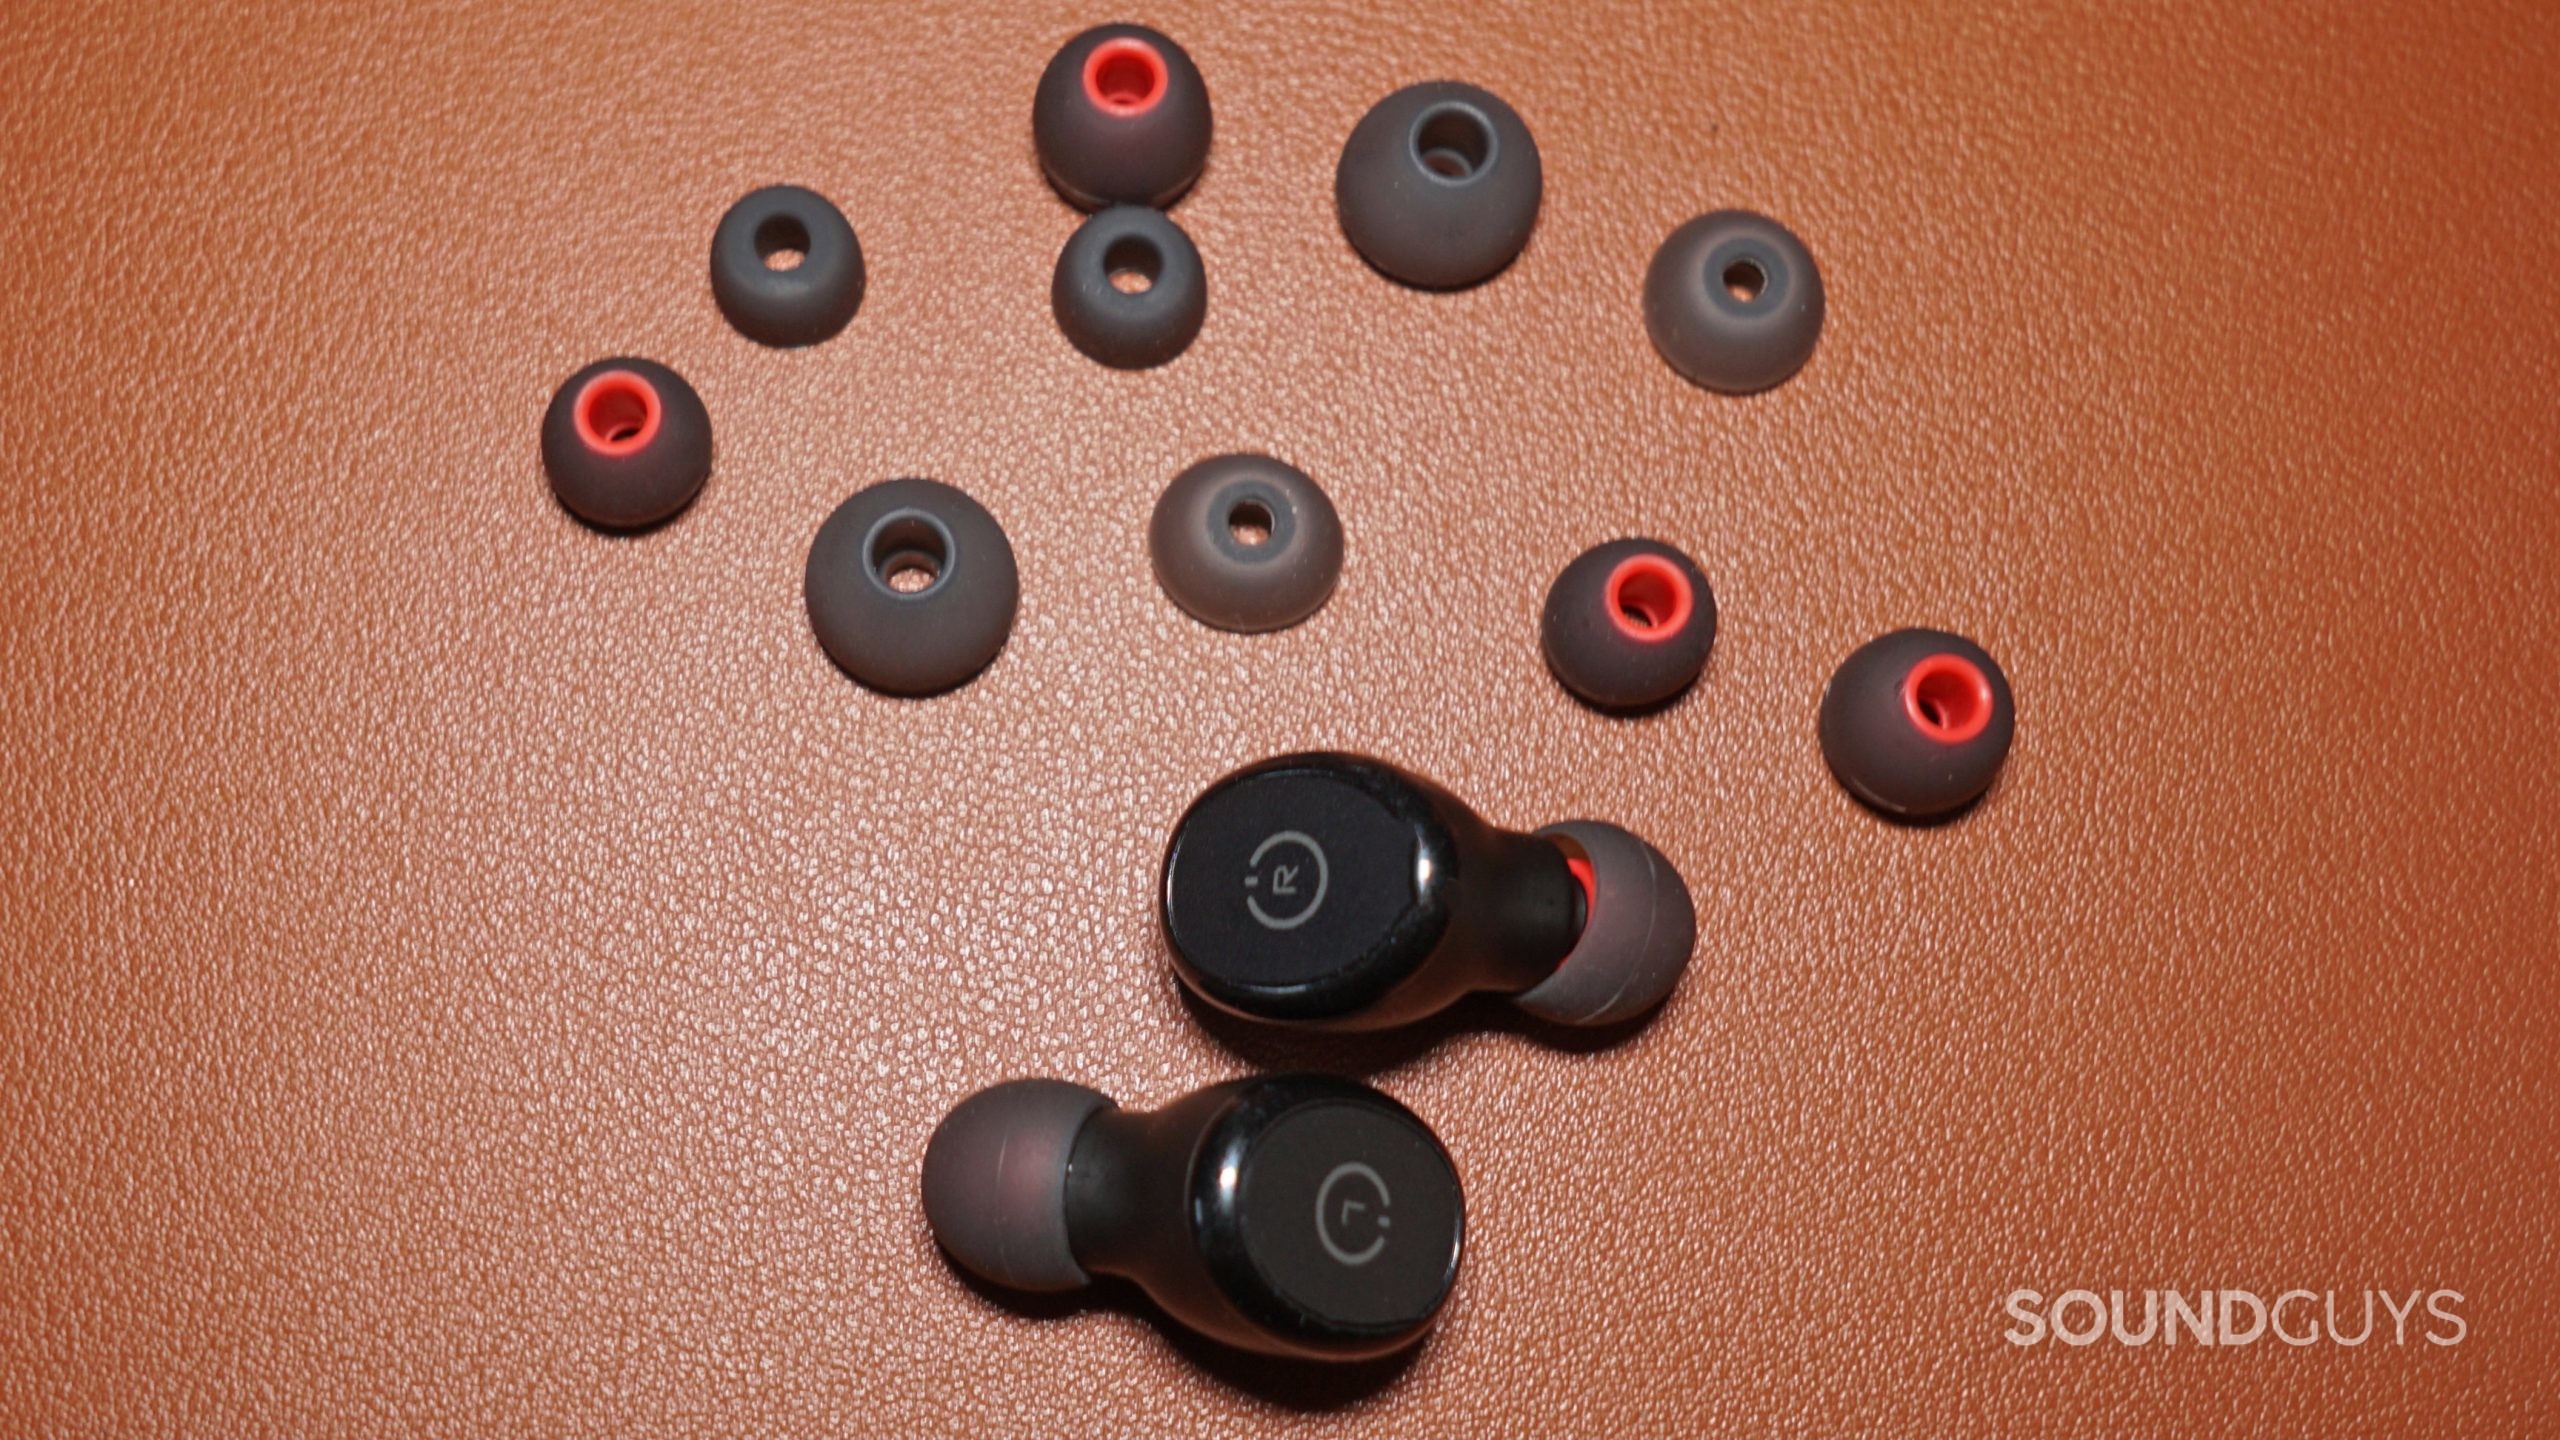 The TOZO T10 lays on a leather surface next to all its additional ear tips.